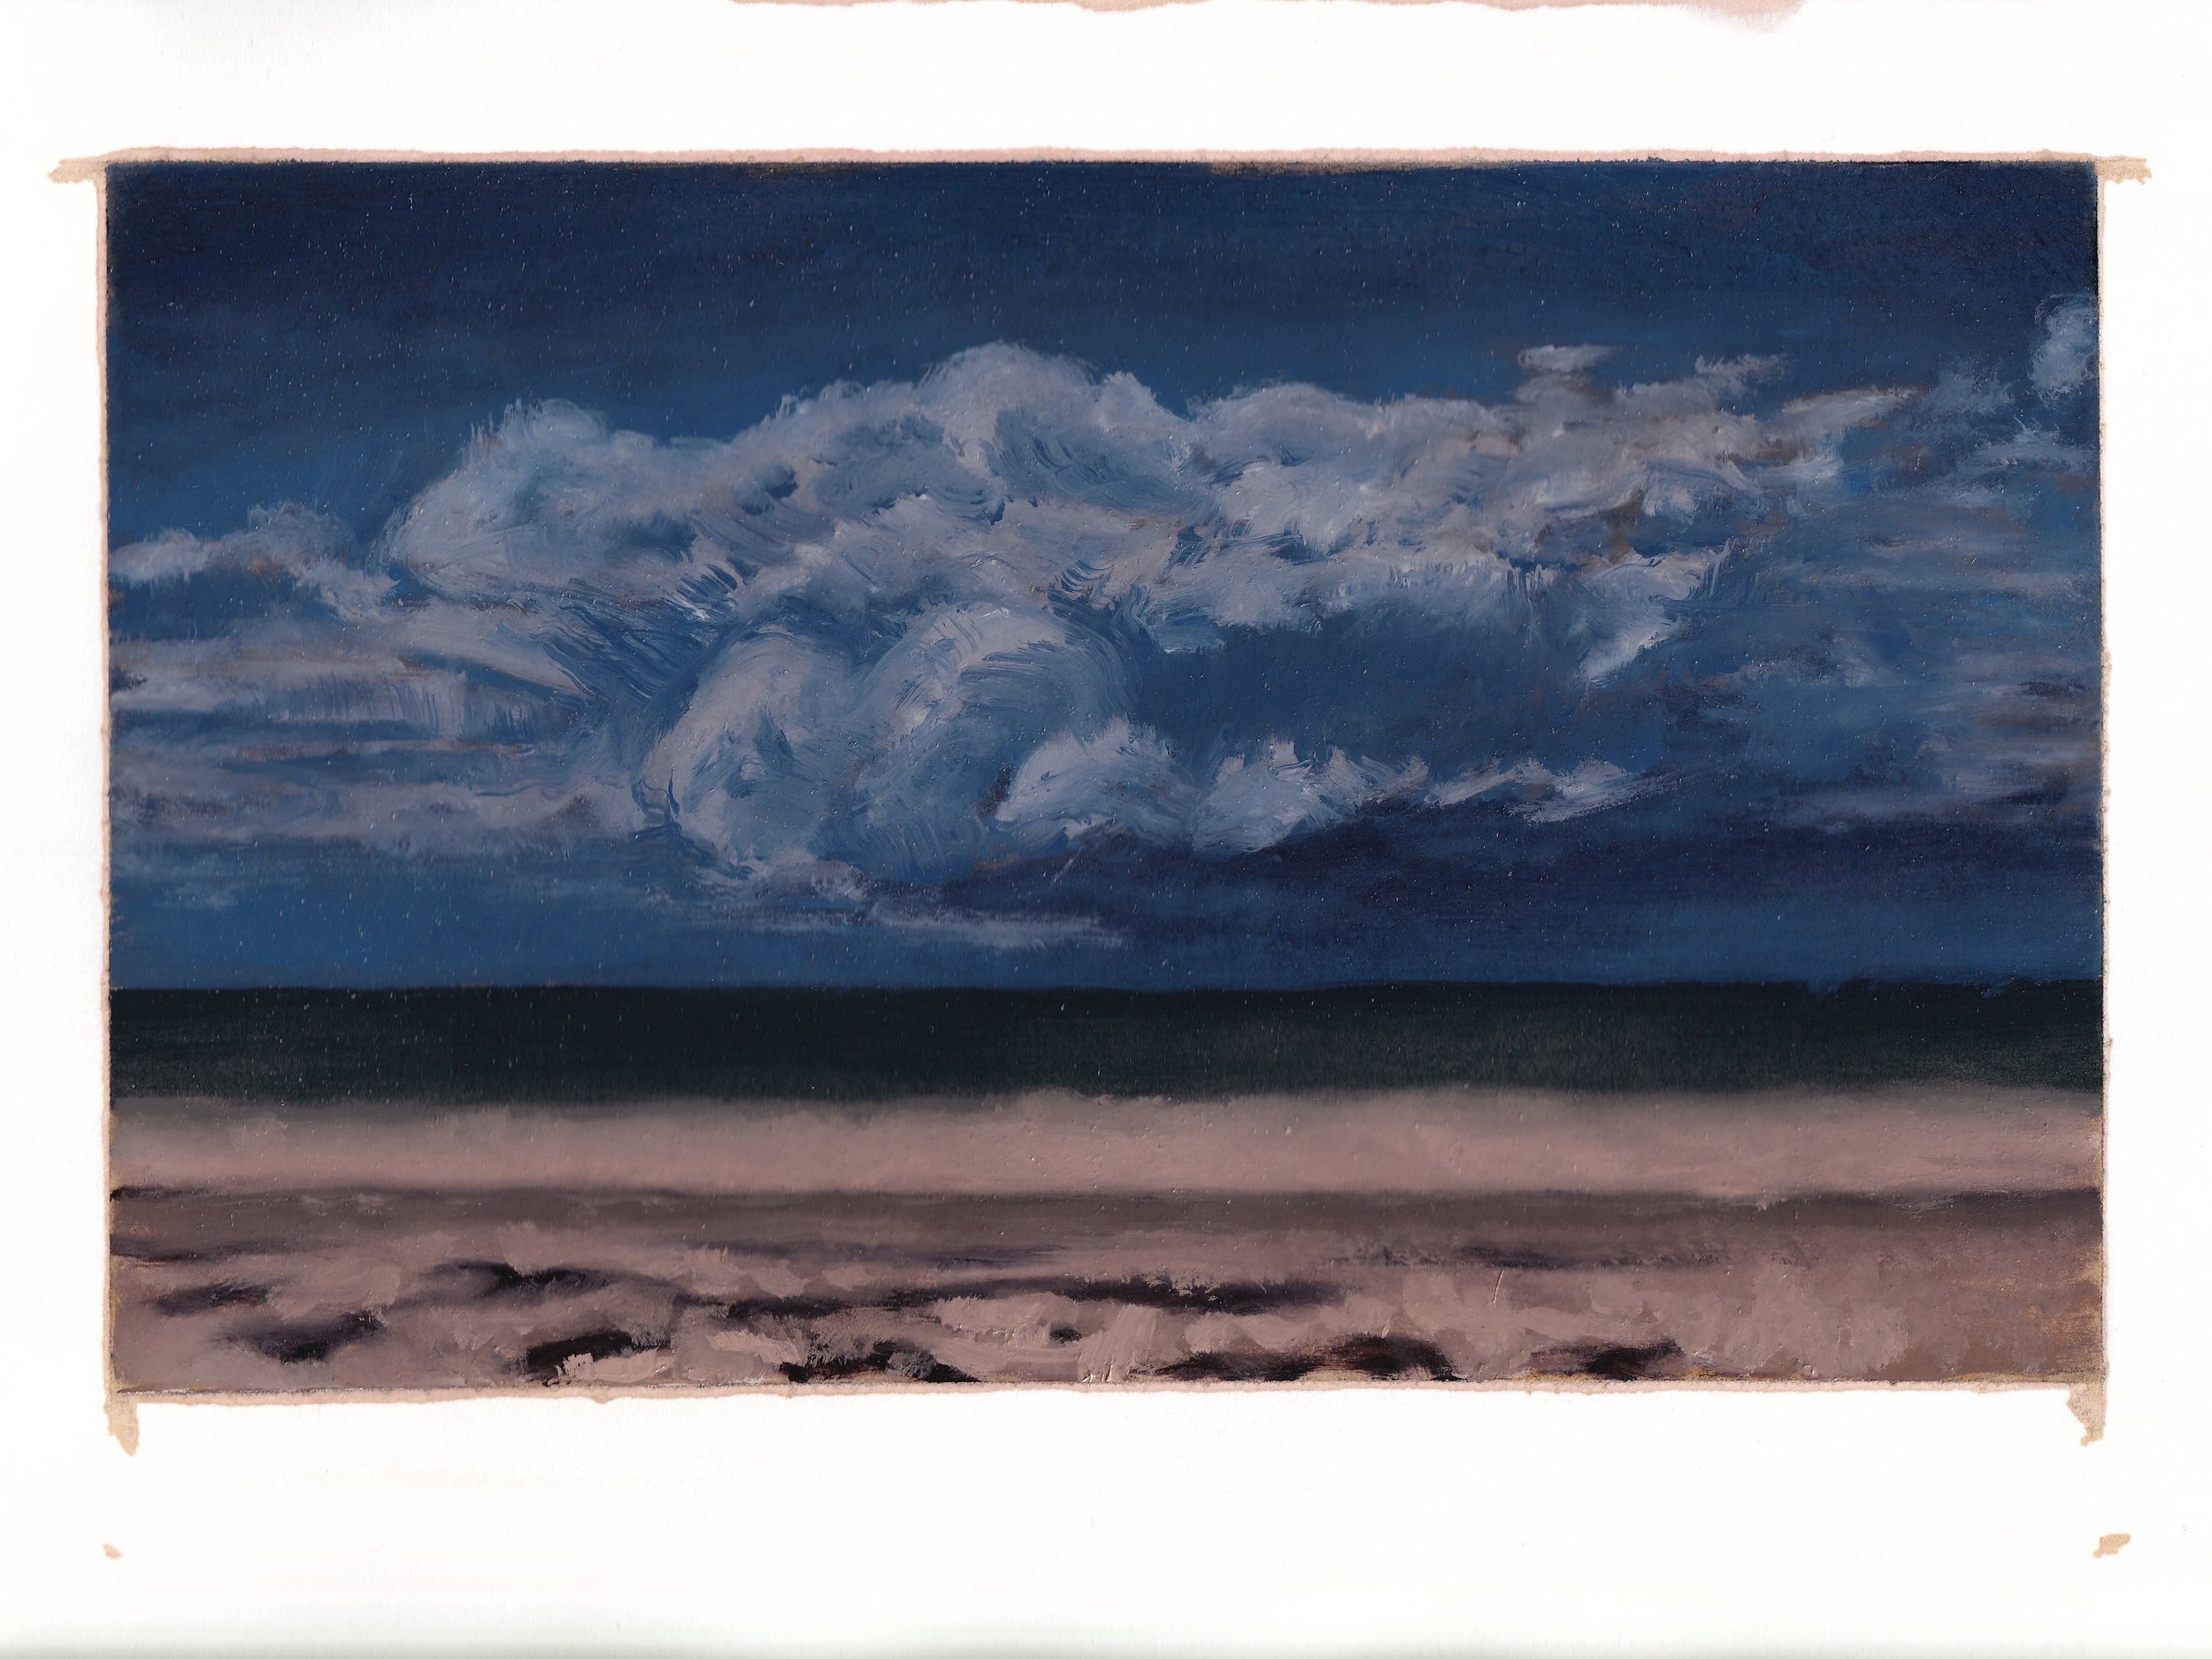  storms over wellfleet - 9” x 12” - 2021 - charcoal, amber shellac, and oil paint on paper 